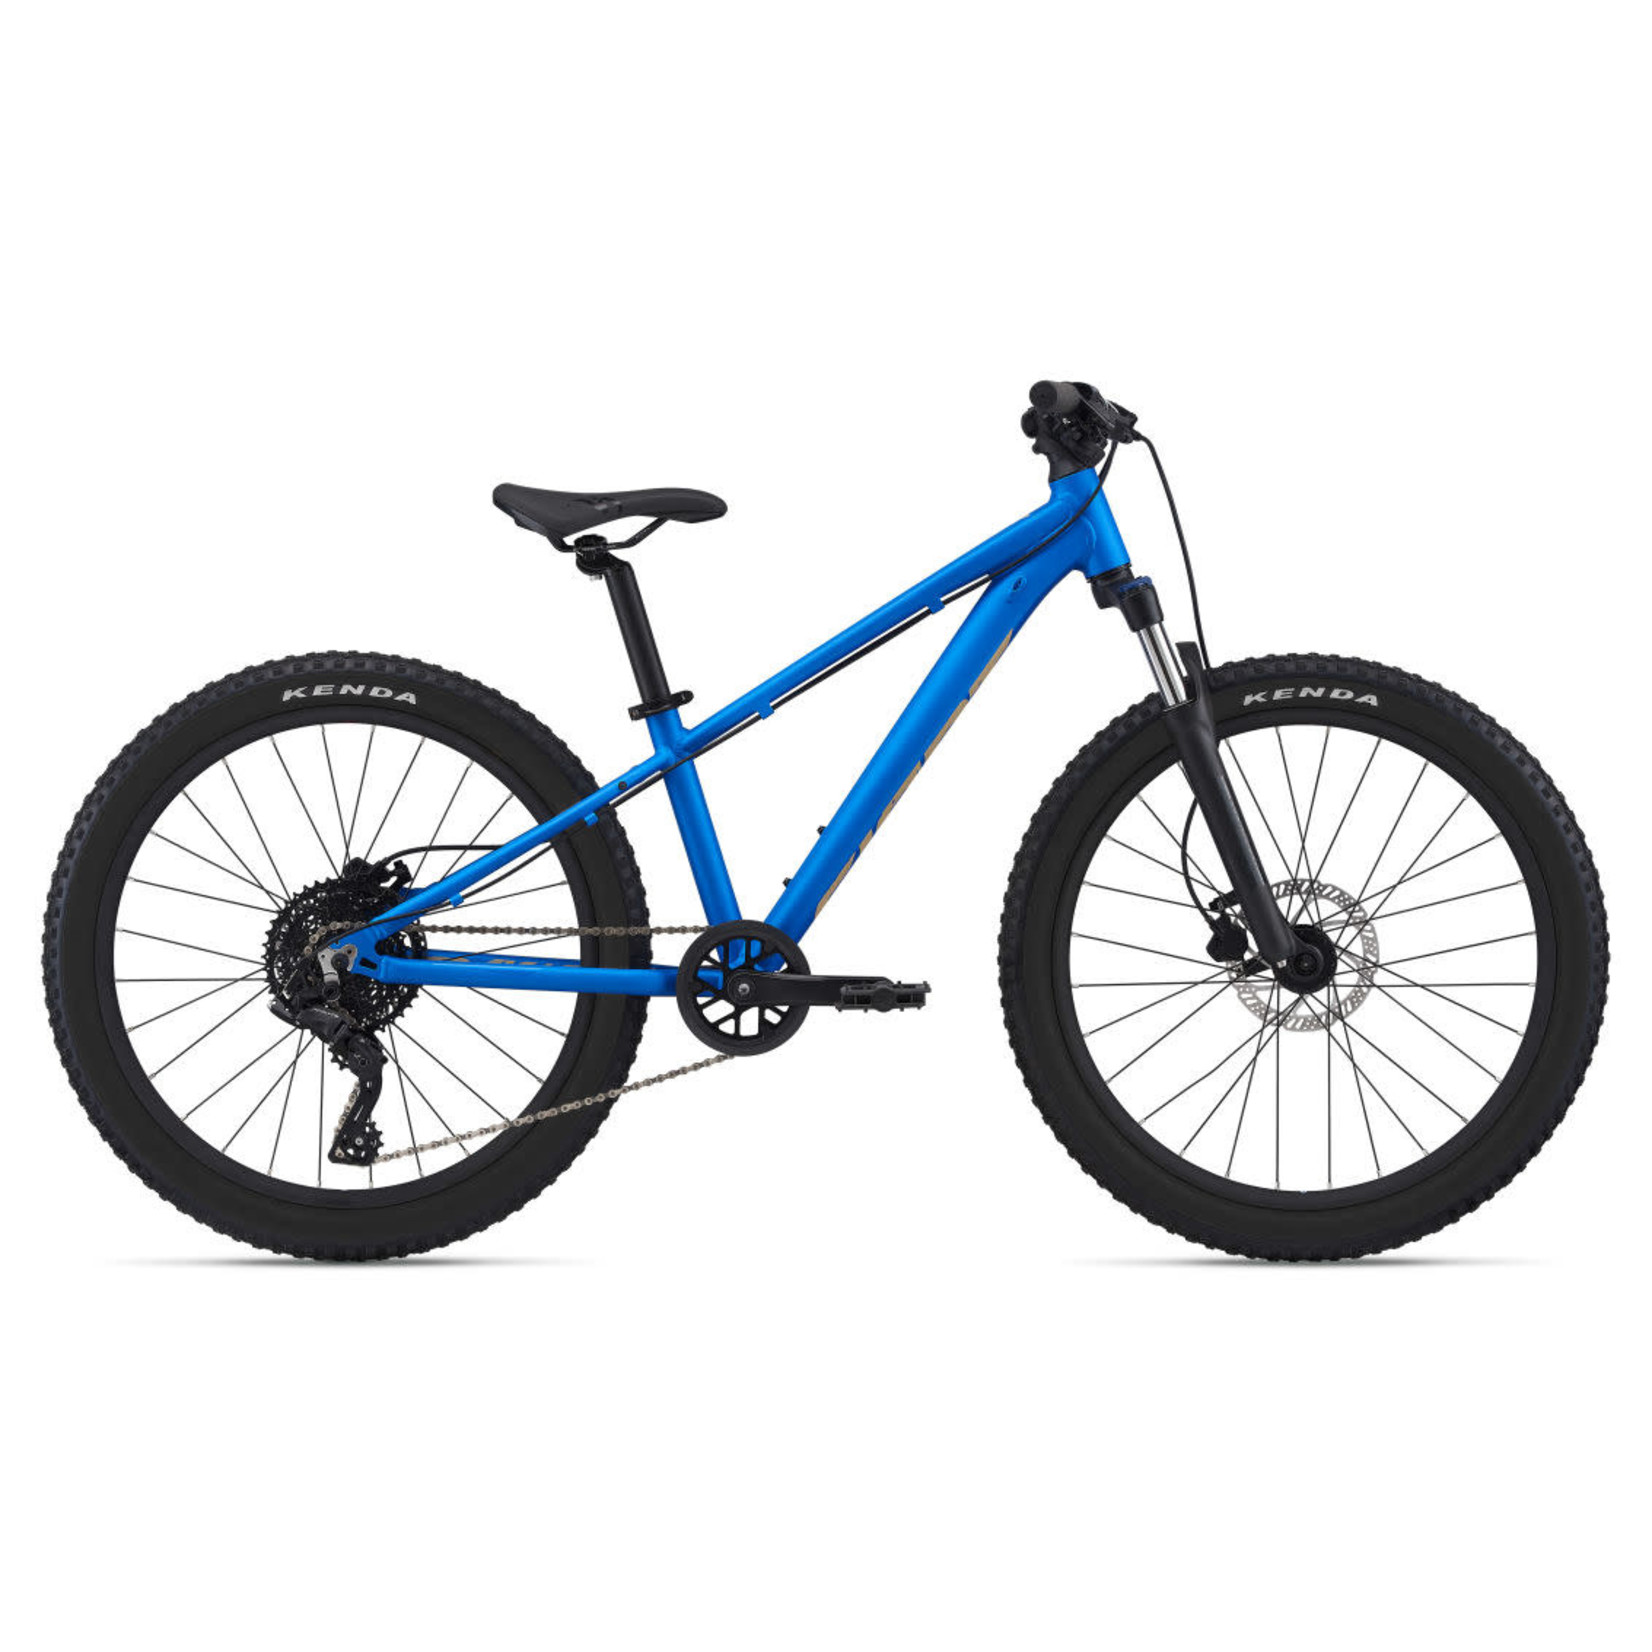 Giant 22 Giant STP 24 FS  One size Azure Blue 7-12 Years (24")